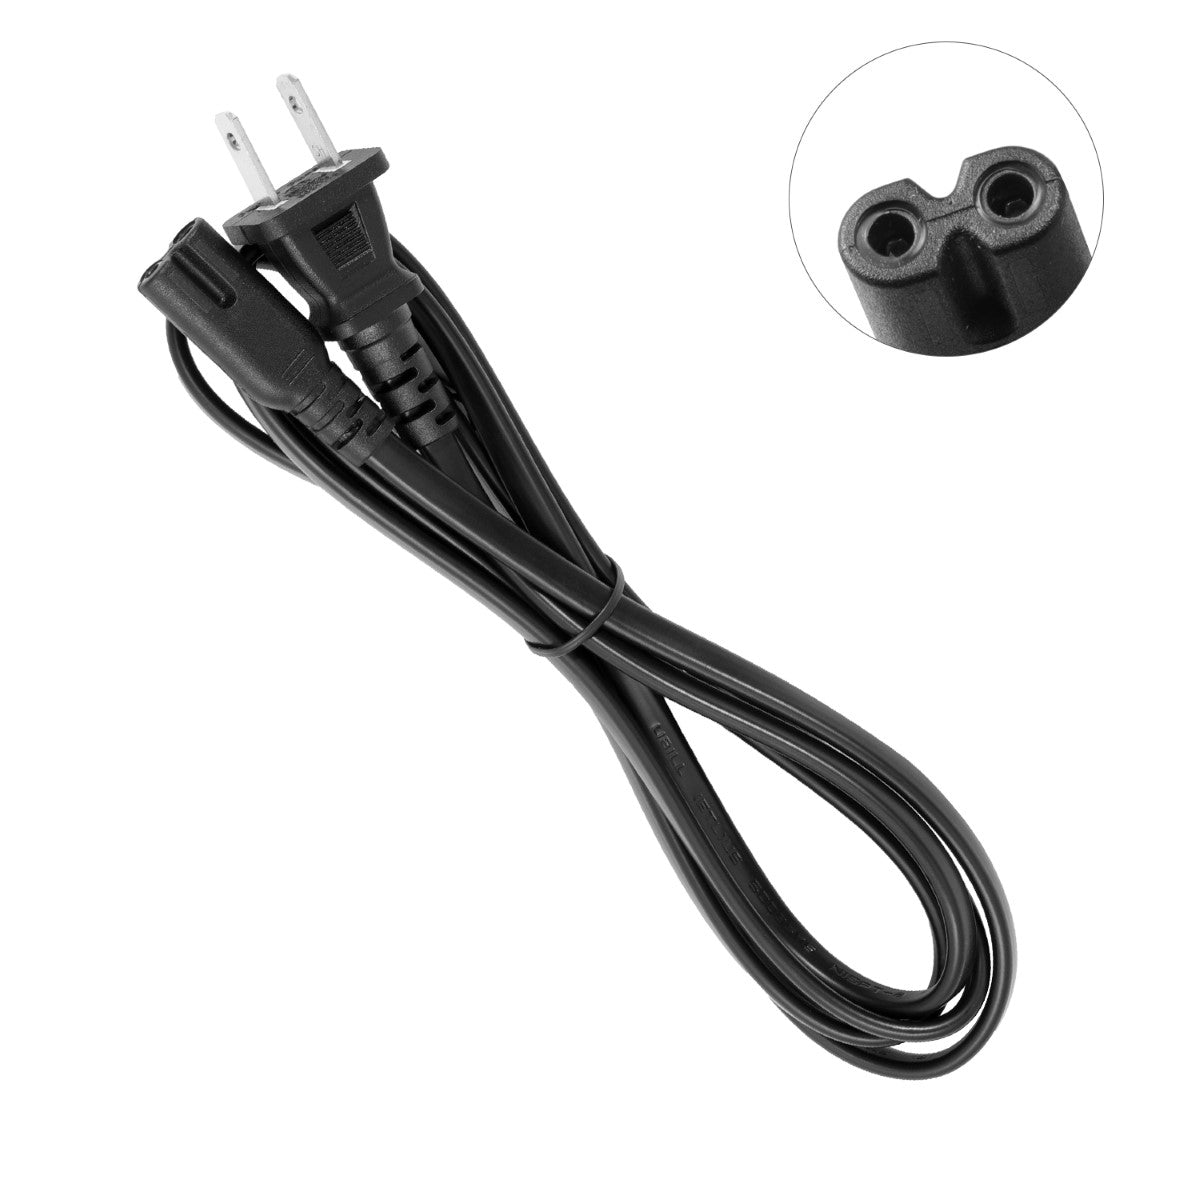 Power Cable for HP DeskJet 2752 All-in-One Printer.